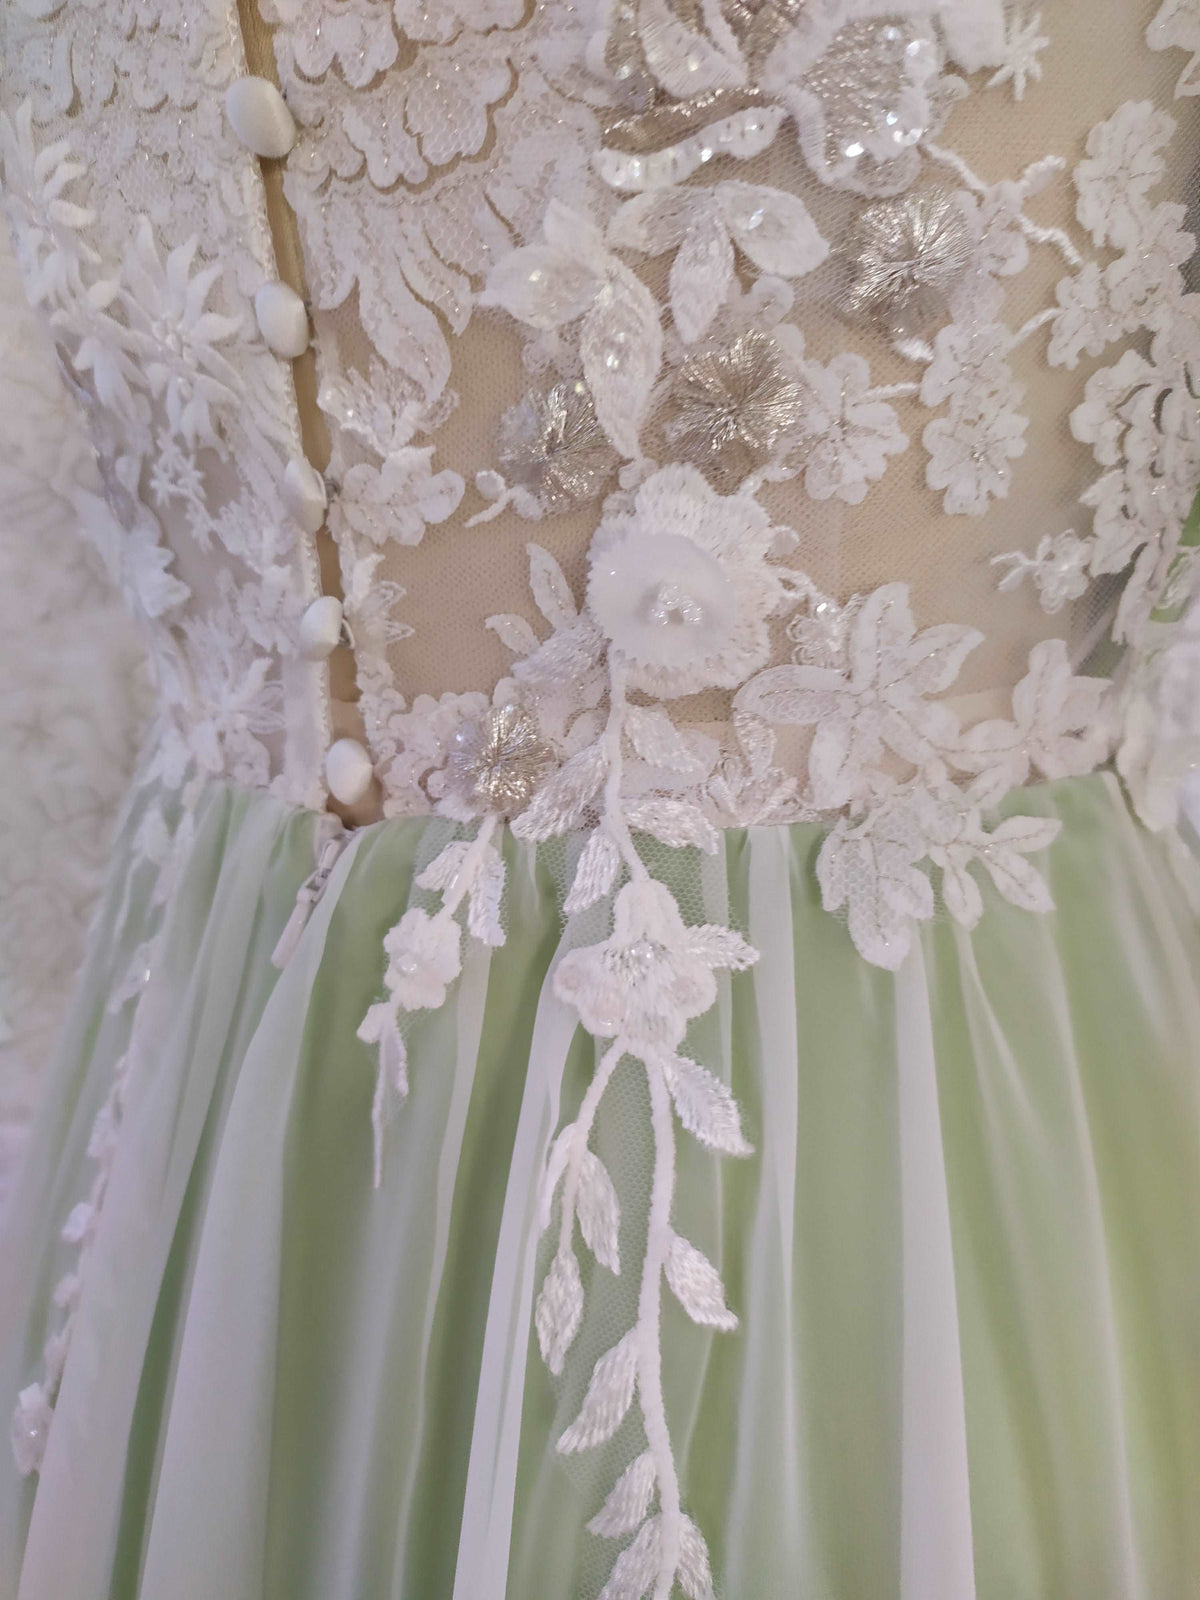 Romantic colorful green silk wedding dress with 3D floral applique. Ready to ship. By Catherine Langlois